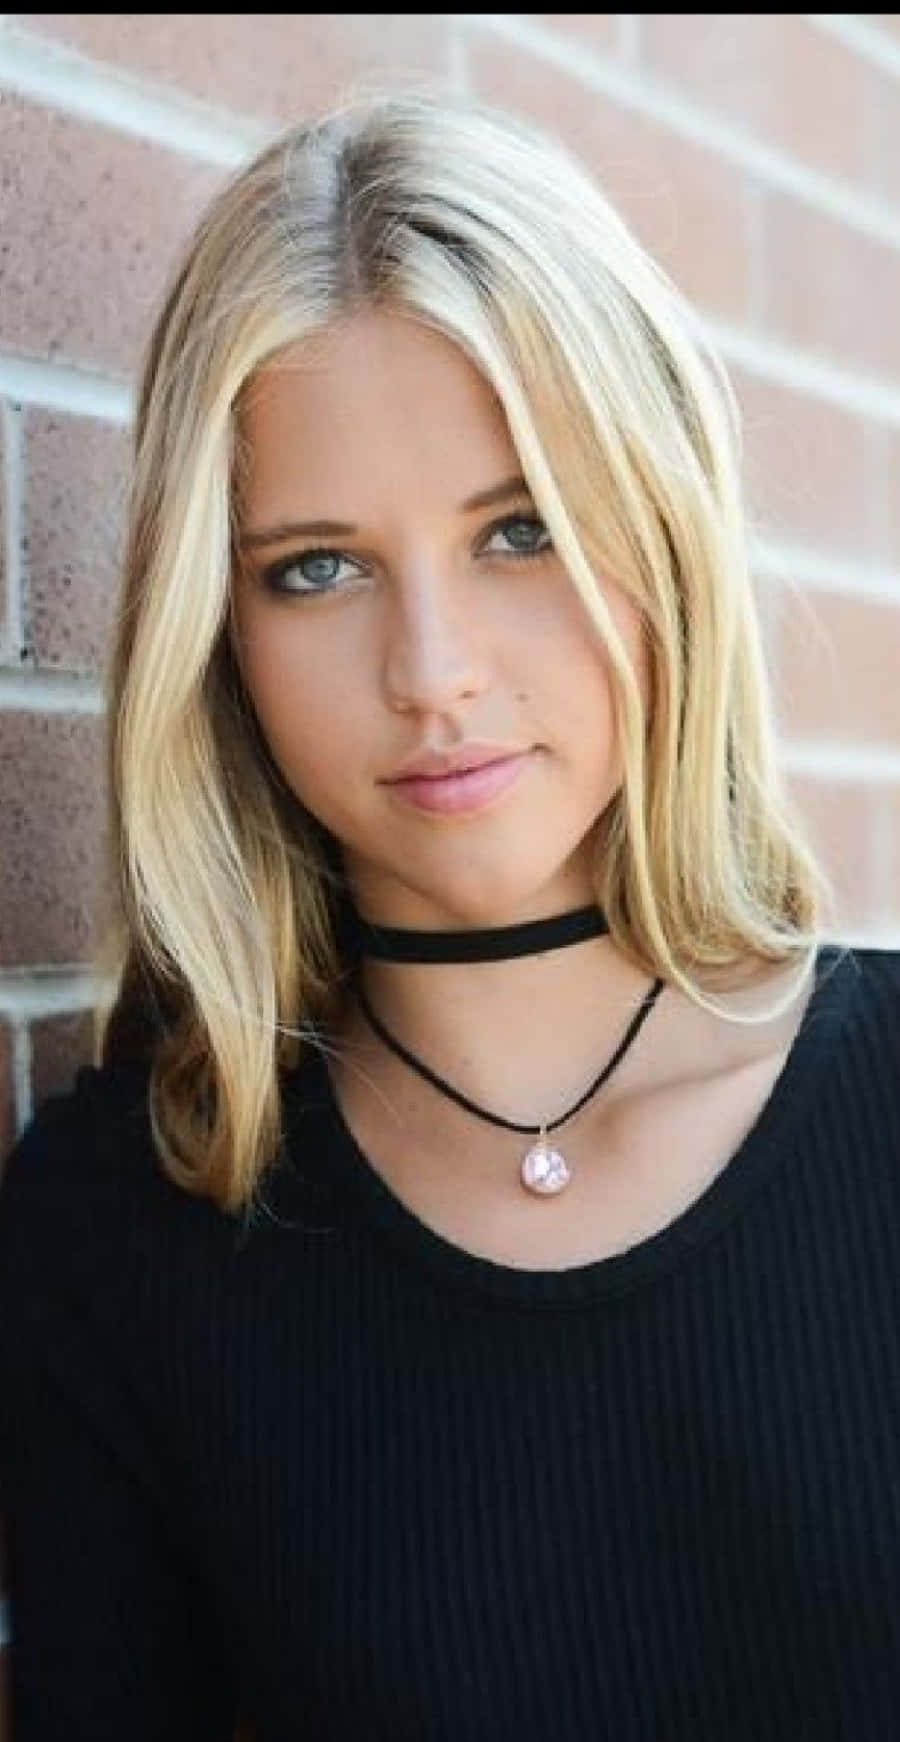 Female With Choker Picture